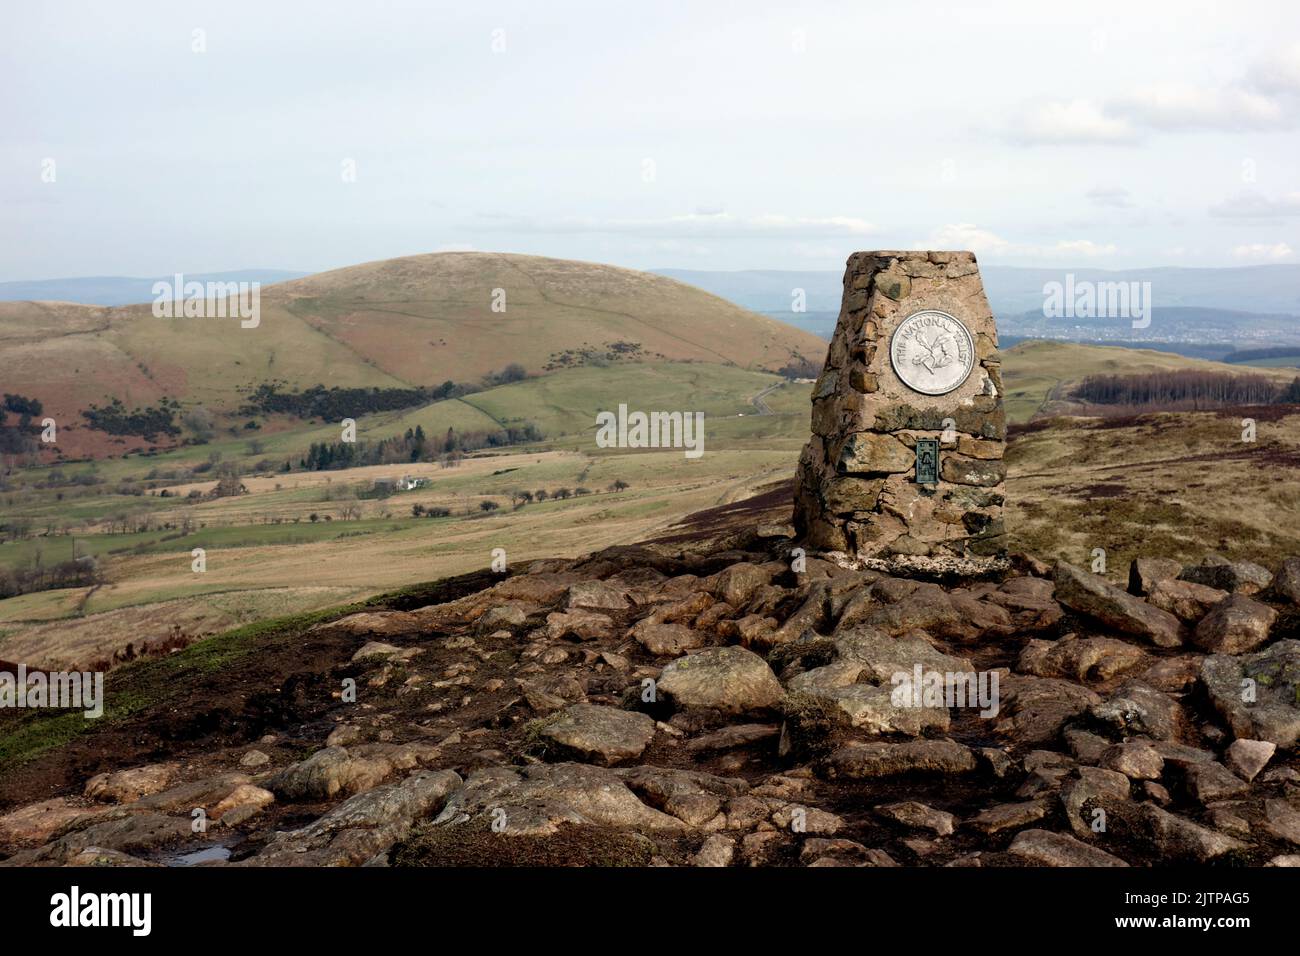 The Trig Pillar on the Summit of the Wainwright 'Gowbarrow Fell' with 'Little Mell Fell' Behind Lake in the Lake District National Park, Cumbria, UK. Stock Photo